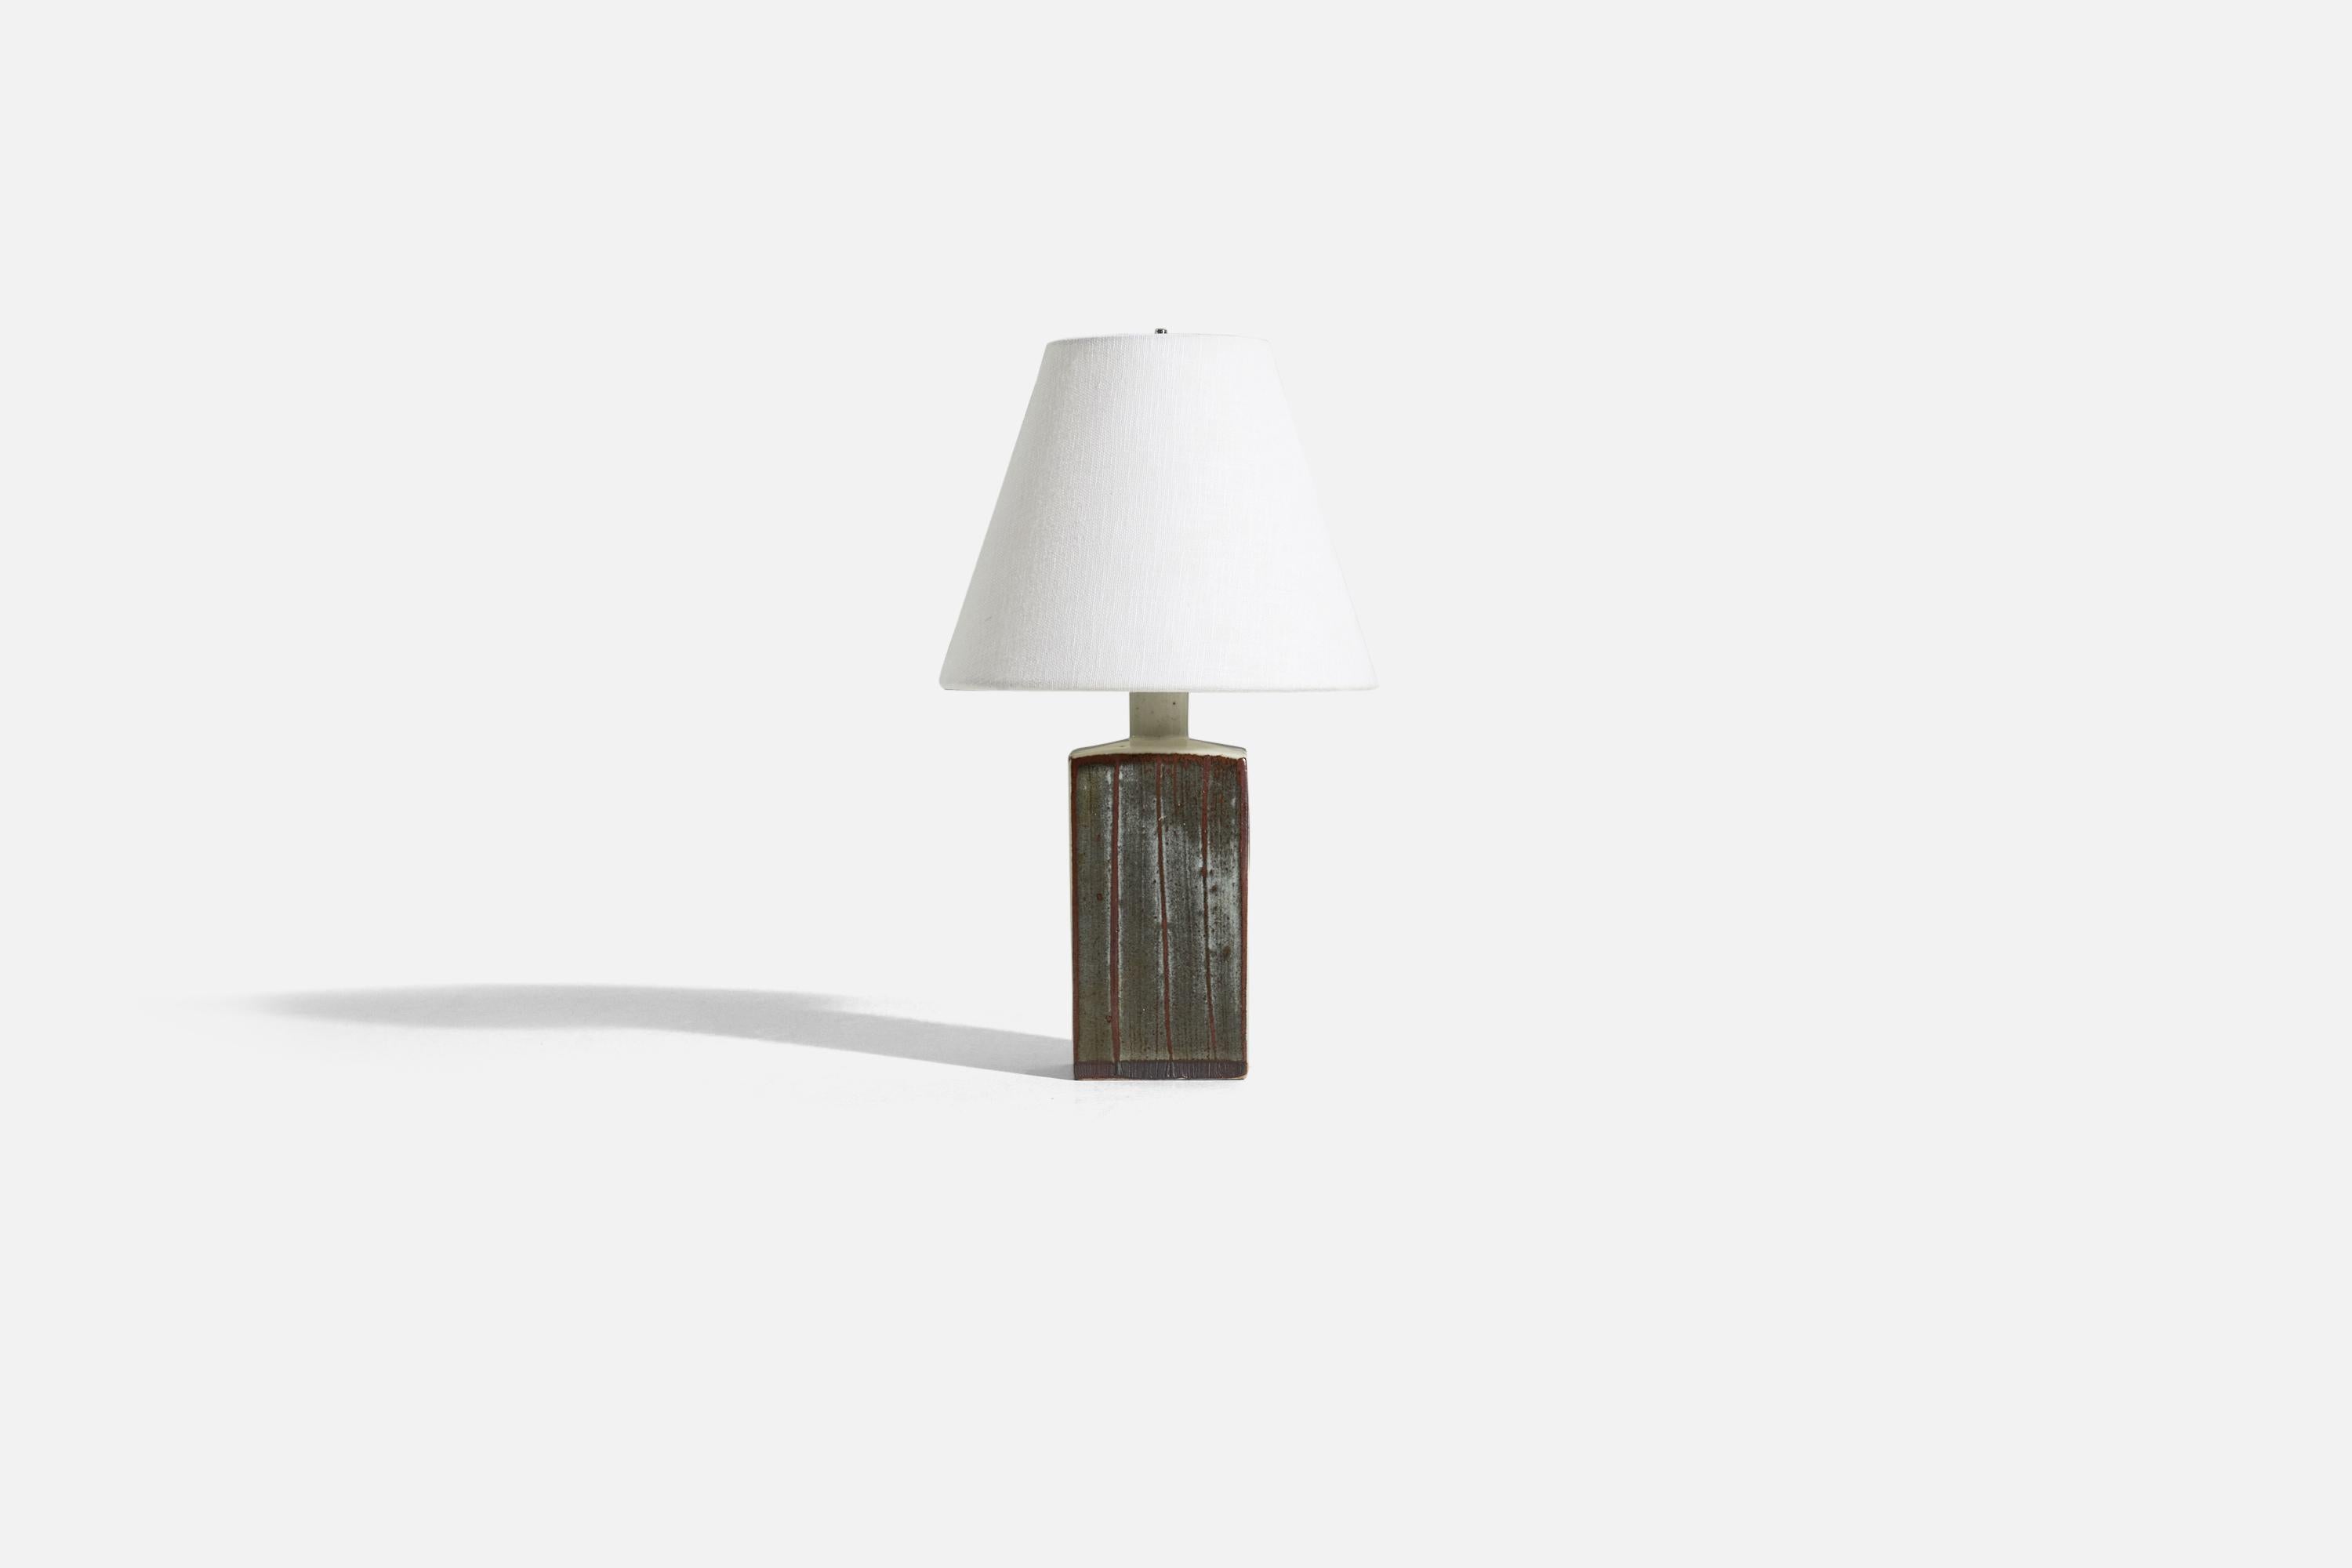 A glazed stoneware table lamp, designed and produced by Niels Refsgaard, Denmark, 1960s.

Sold without lampshade. 
Dimensions of Lamp (inches) : 10 x 3.25 x 2.625 (H x W x D)
Dimensions of Shade (inches) : 4 x 8 x 6.75 (T x B x H)
Dimension of